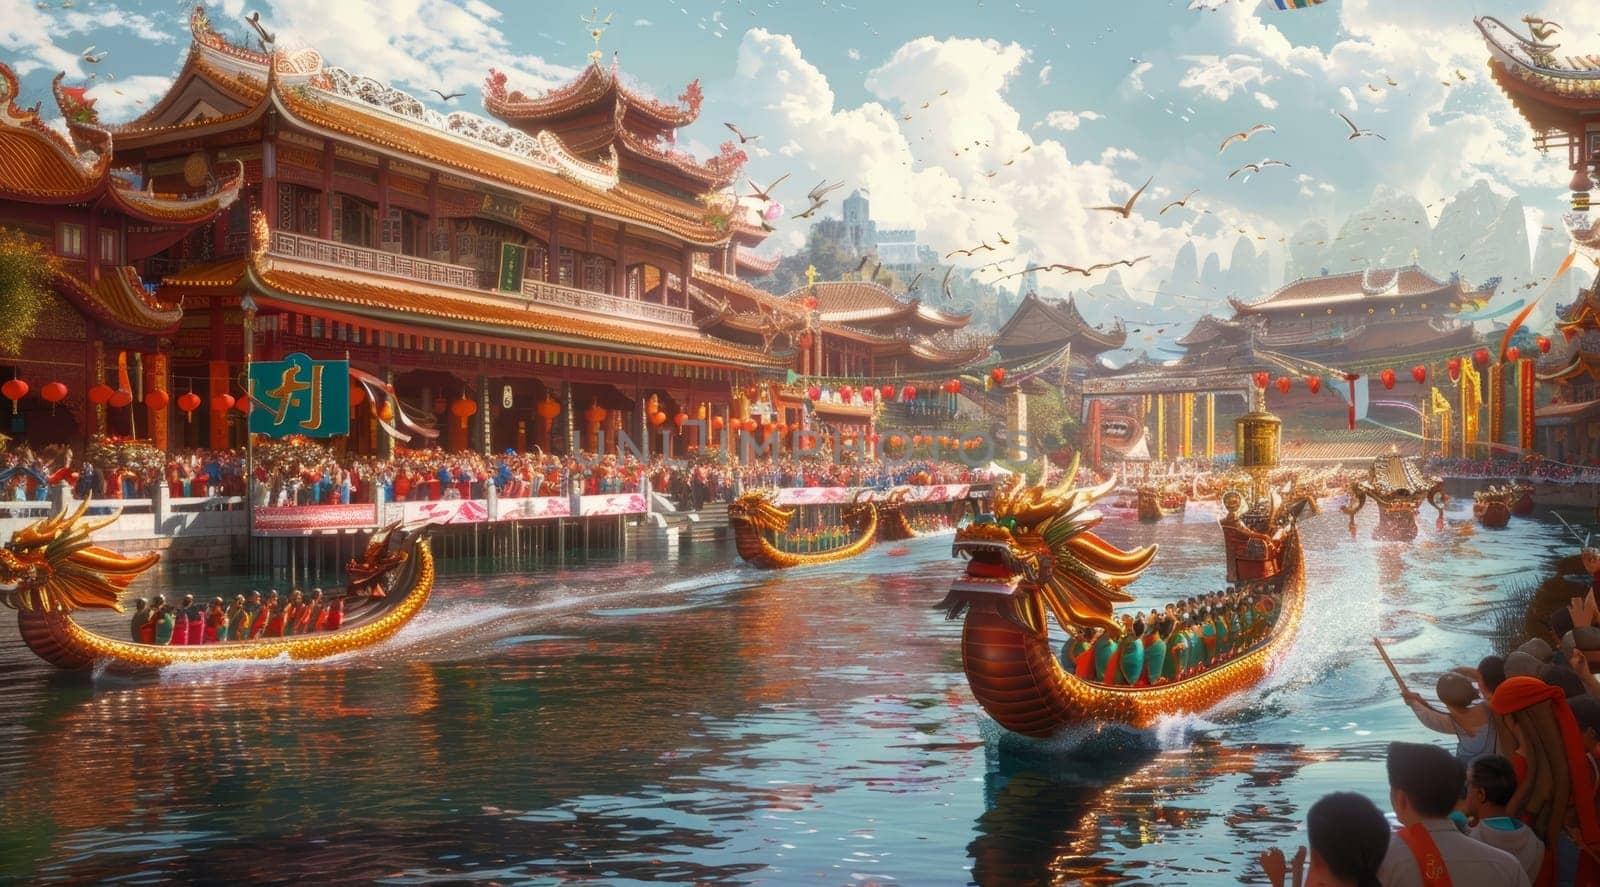 A bustling Dragon Boat Festival with ornate dragon boats racing on a river, flanked by historic architecture and cheering crowds